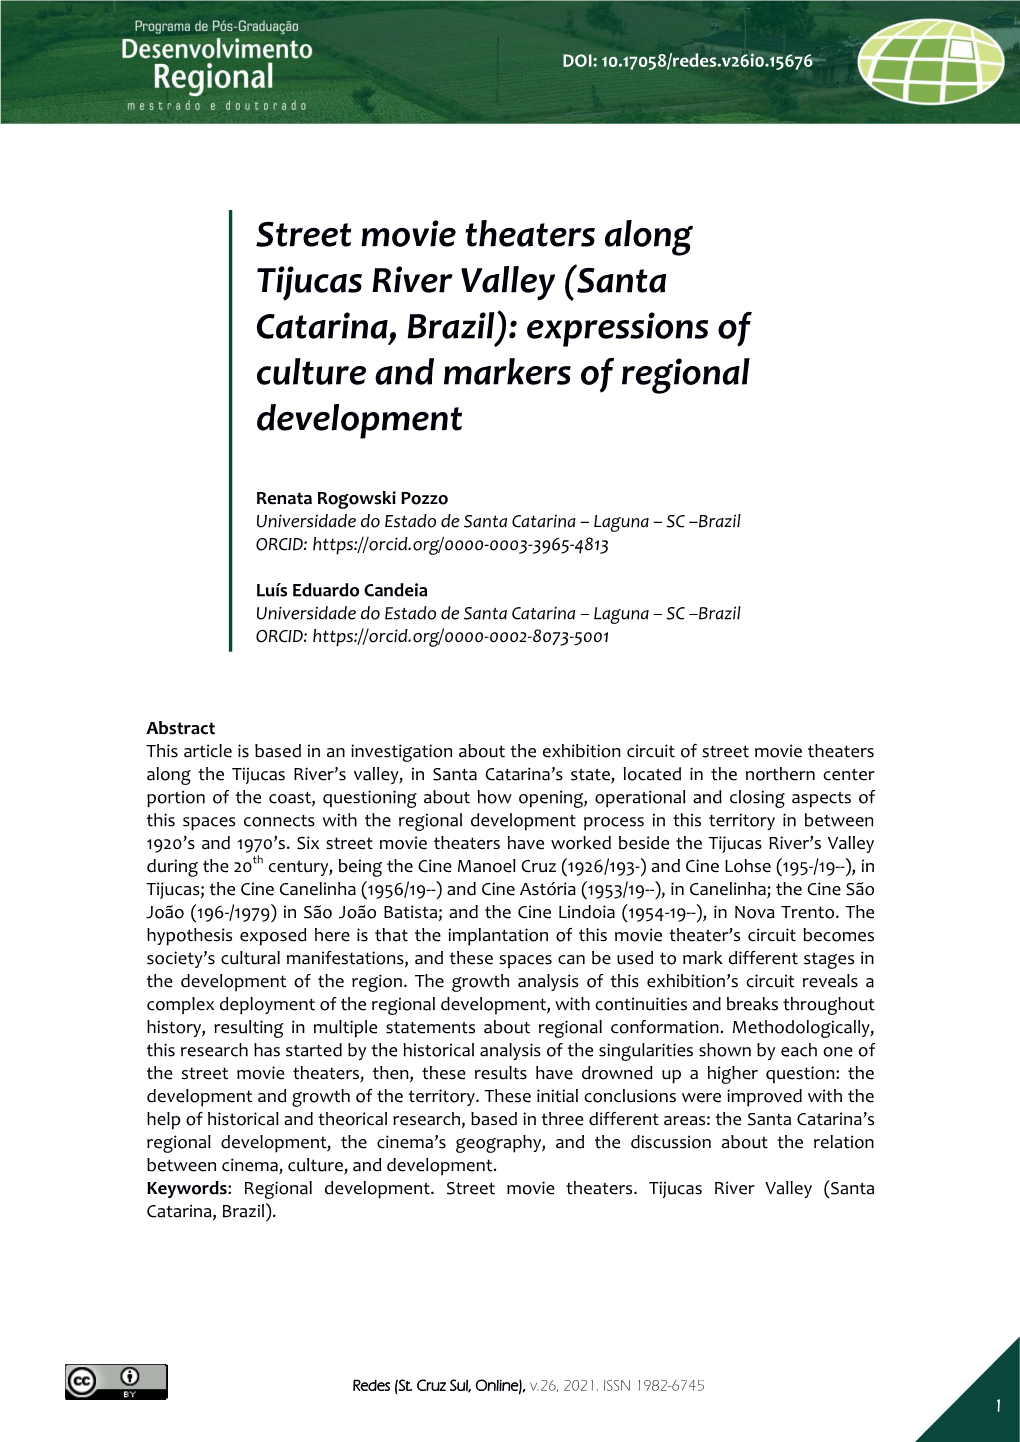 Street Movie Theaters Along Tijucas River Valley (Santa Catarina, Brazil): Expressions of Culture and Markers of Regional Development